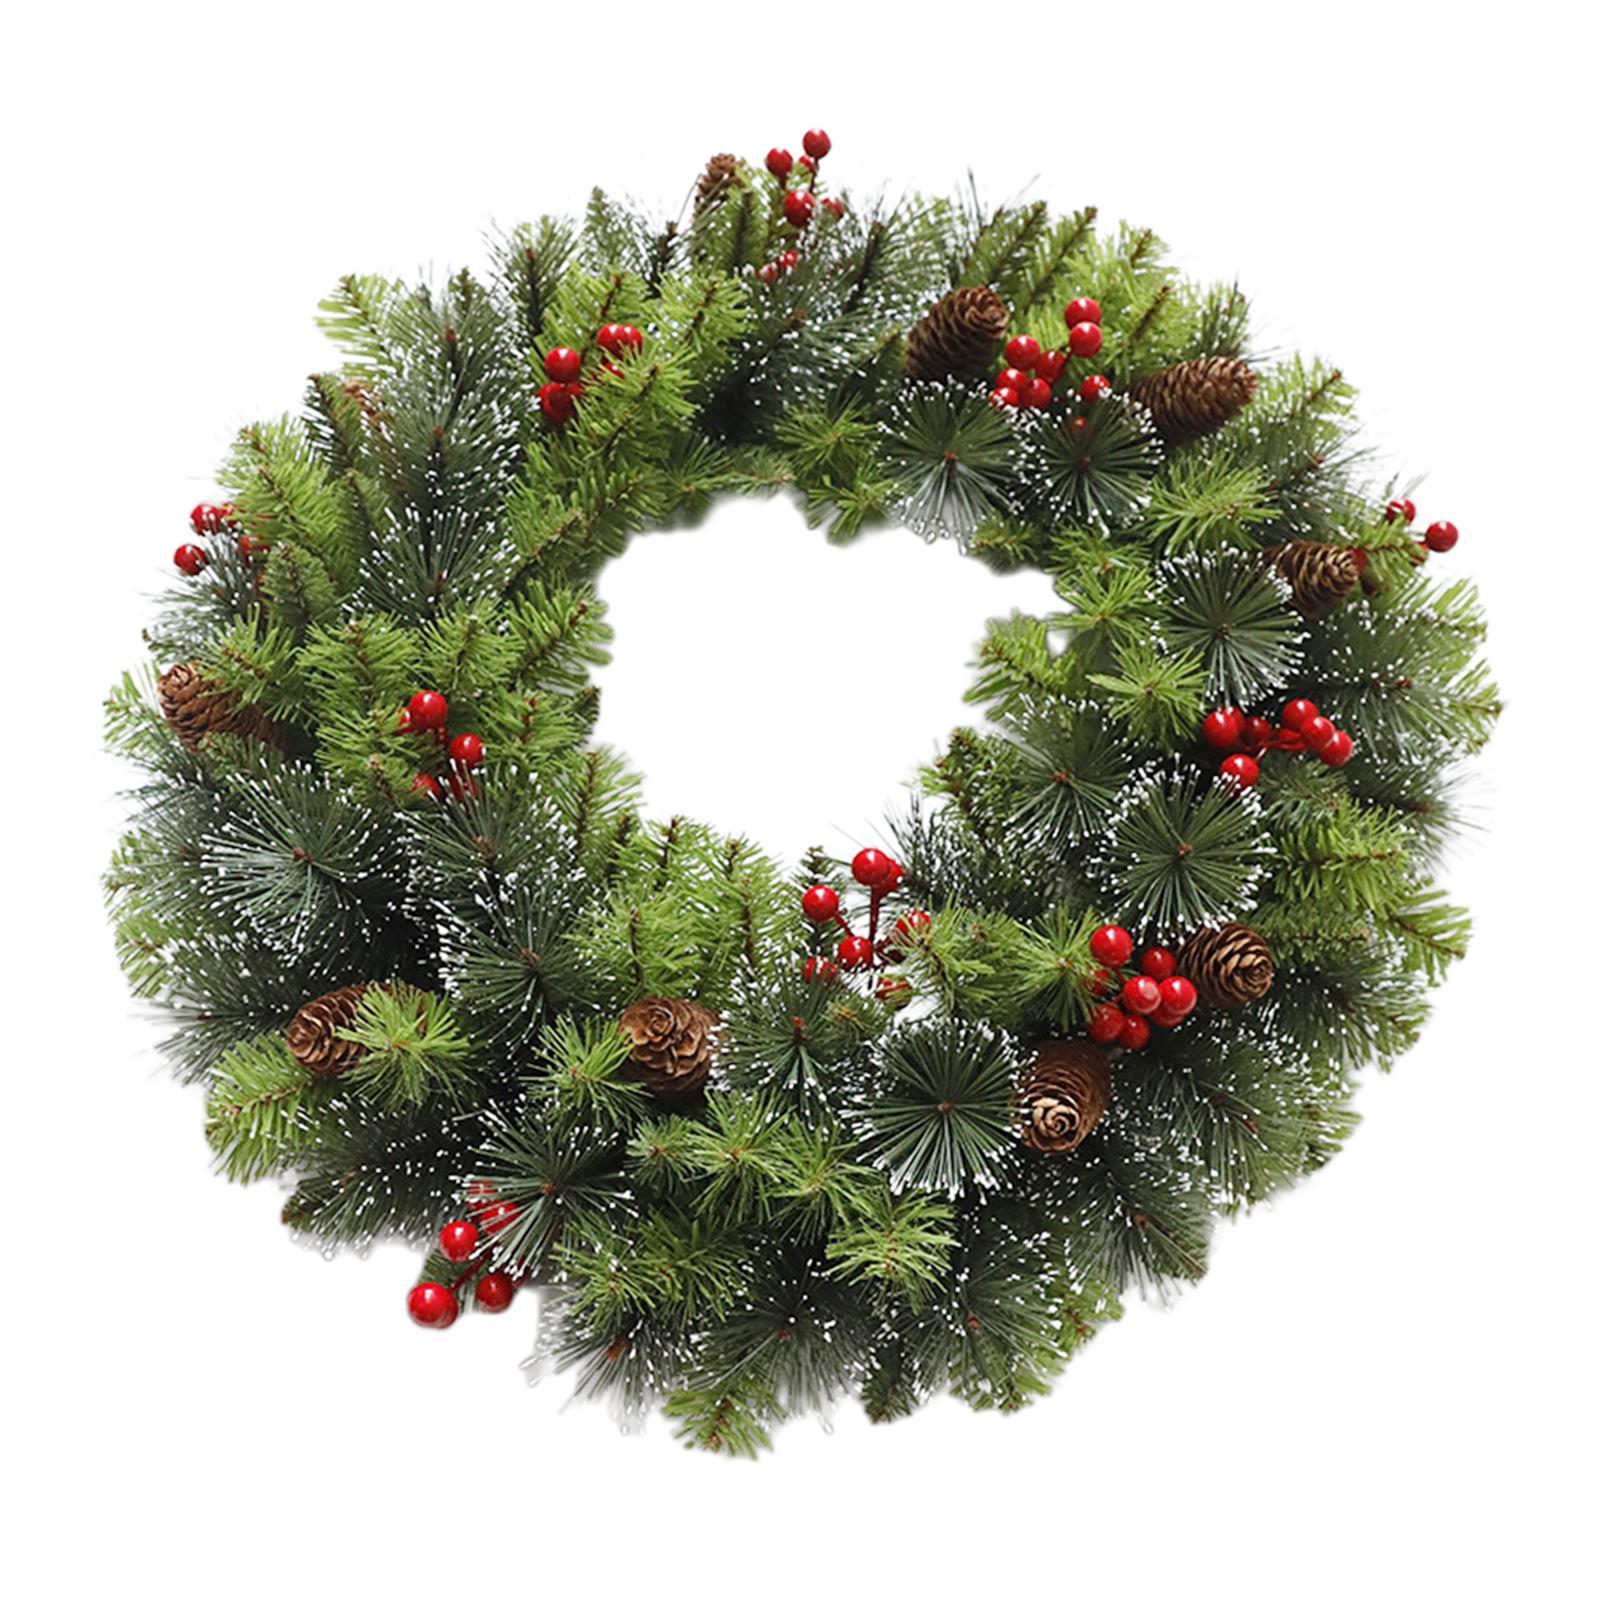 Artificial Wreath Christmas Ornament Wall Hanging for Door Window Party Xmas Decoration